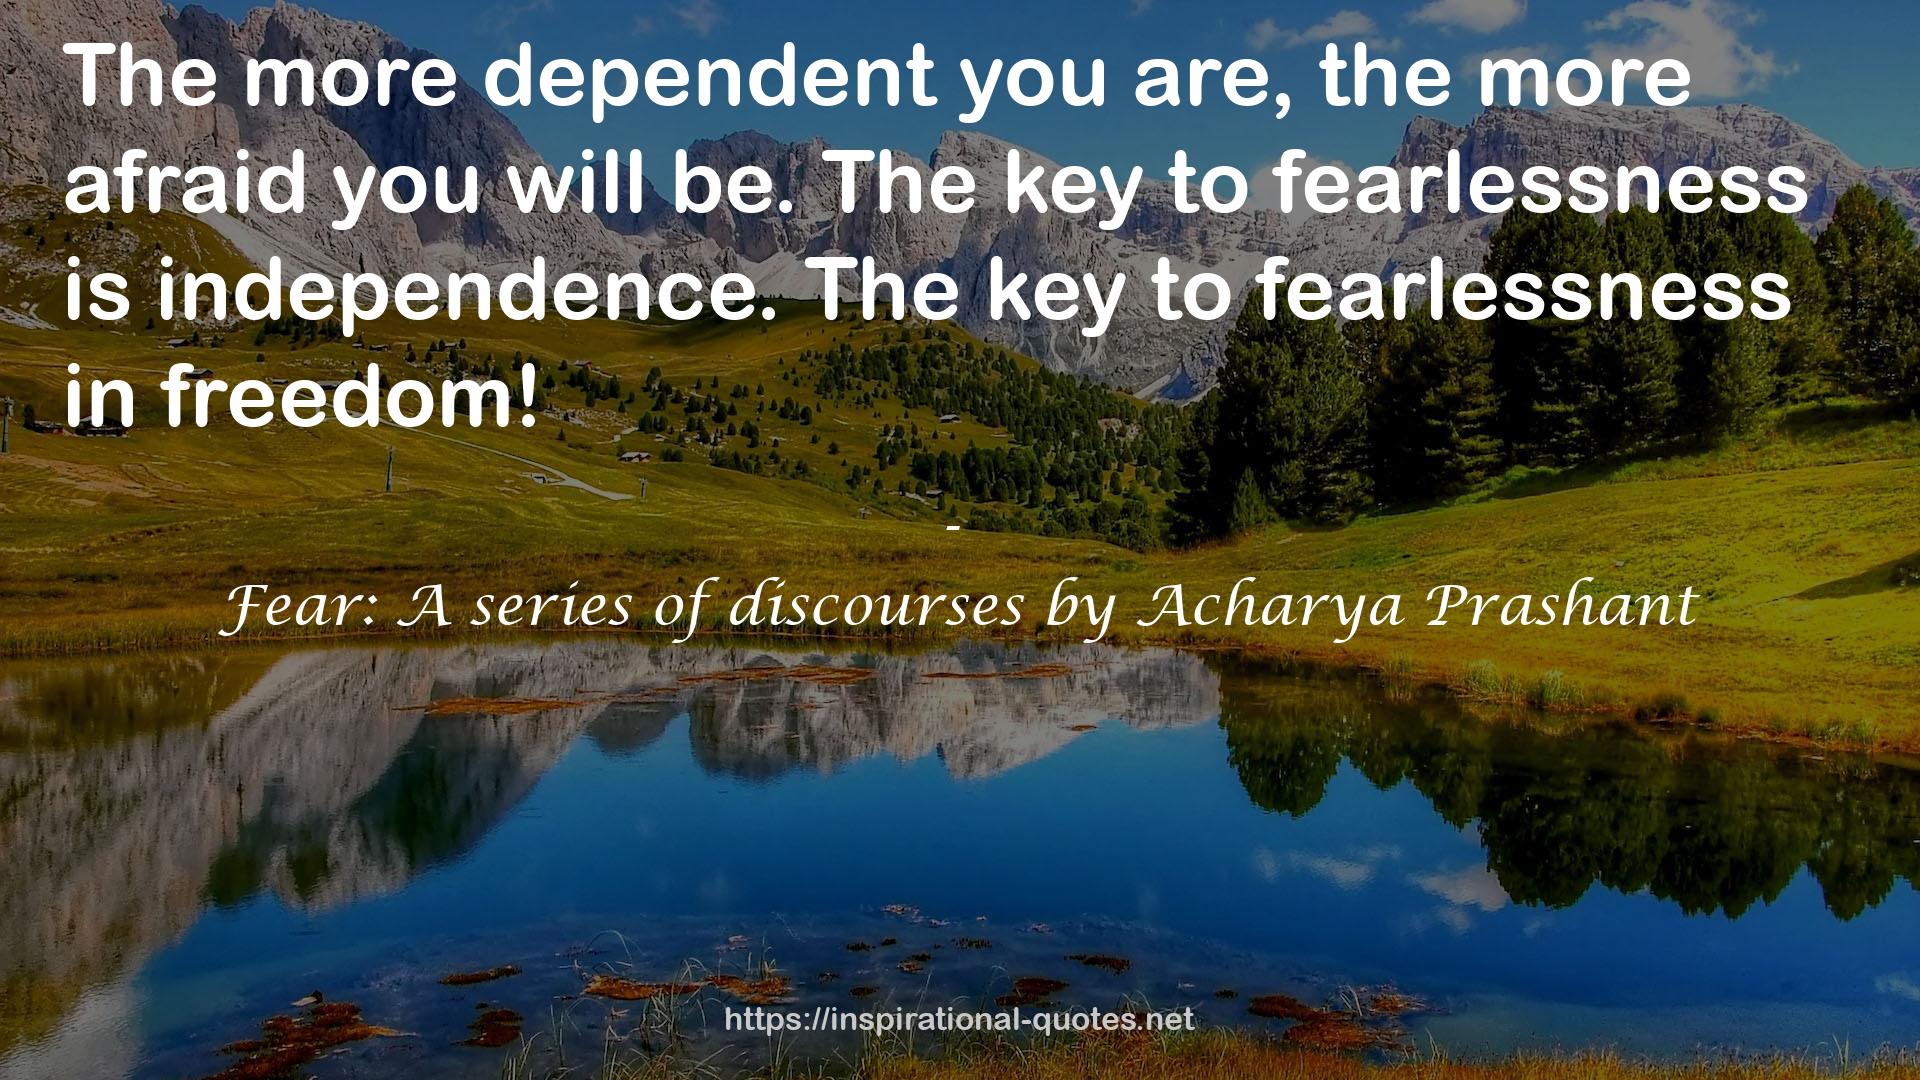 Fear: A series of discourses by Acharya Prashant QUOTES